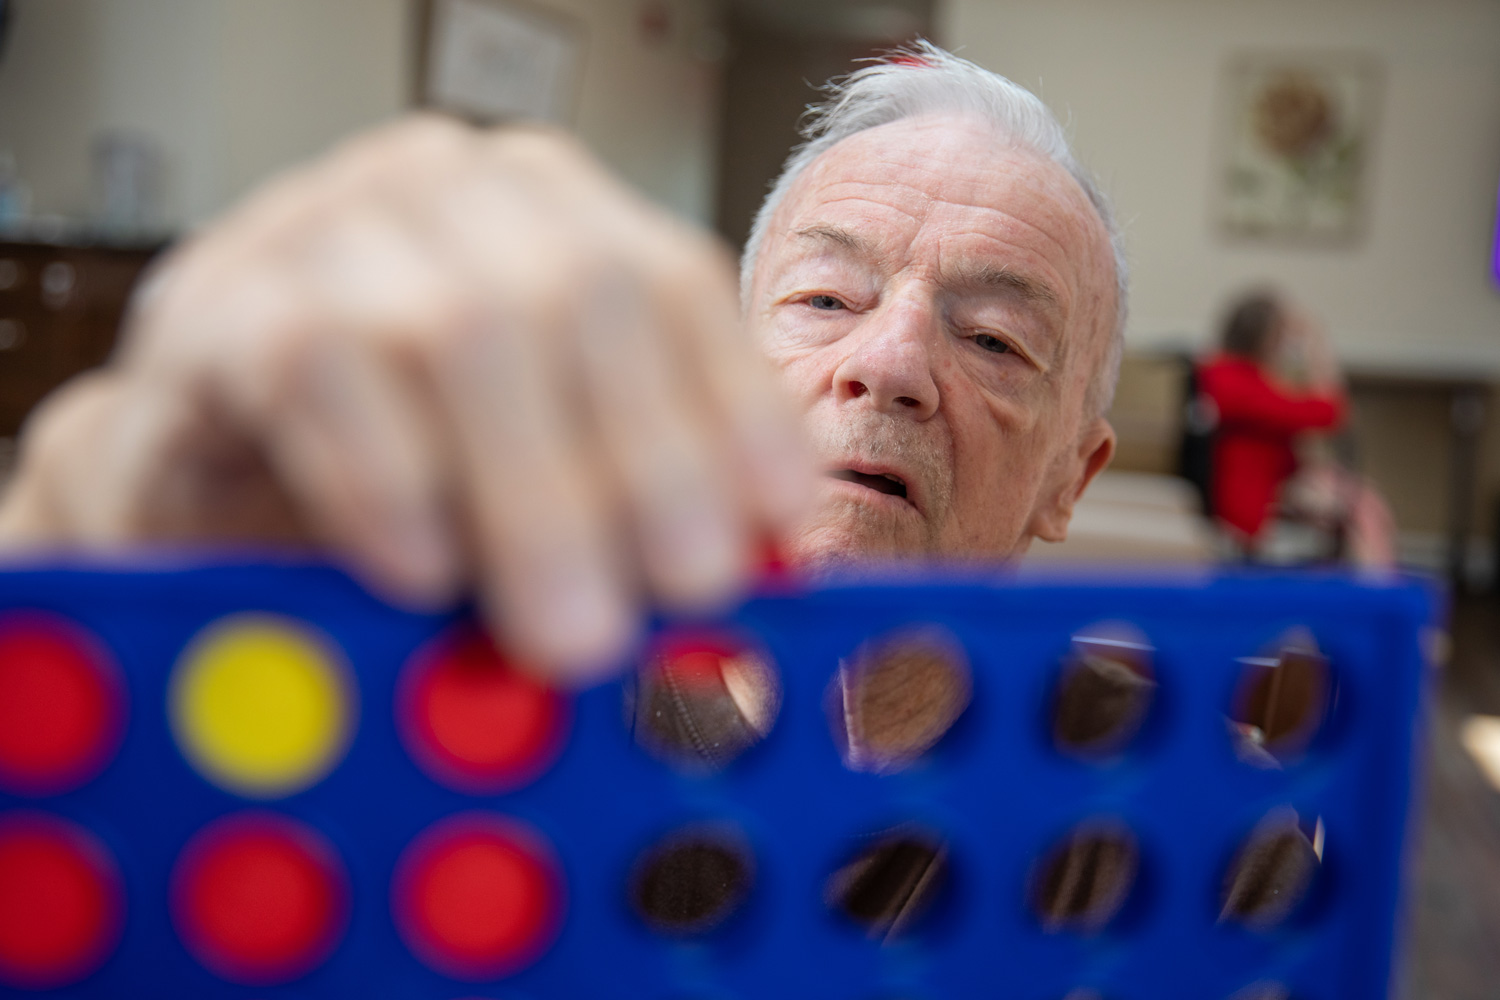 elderly care resident playing a game of link 4